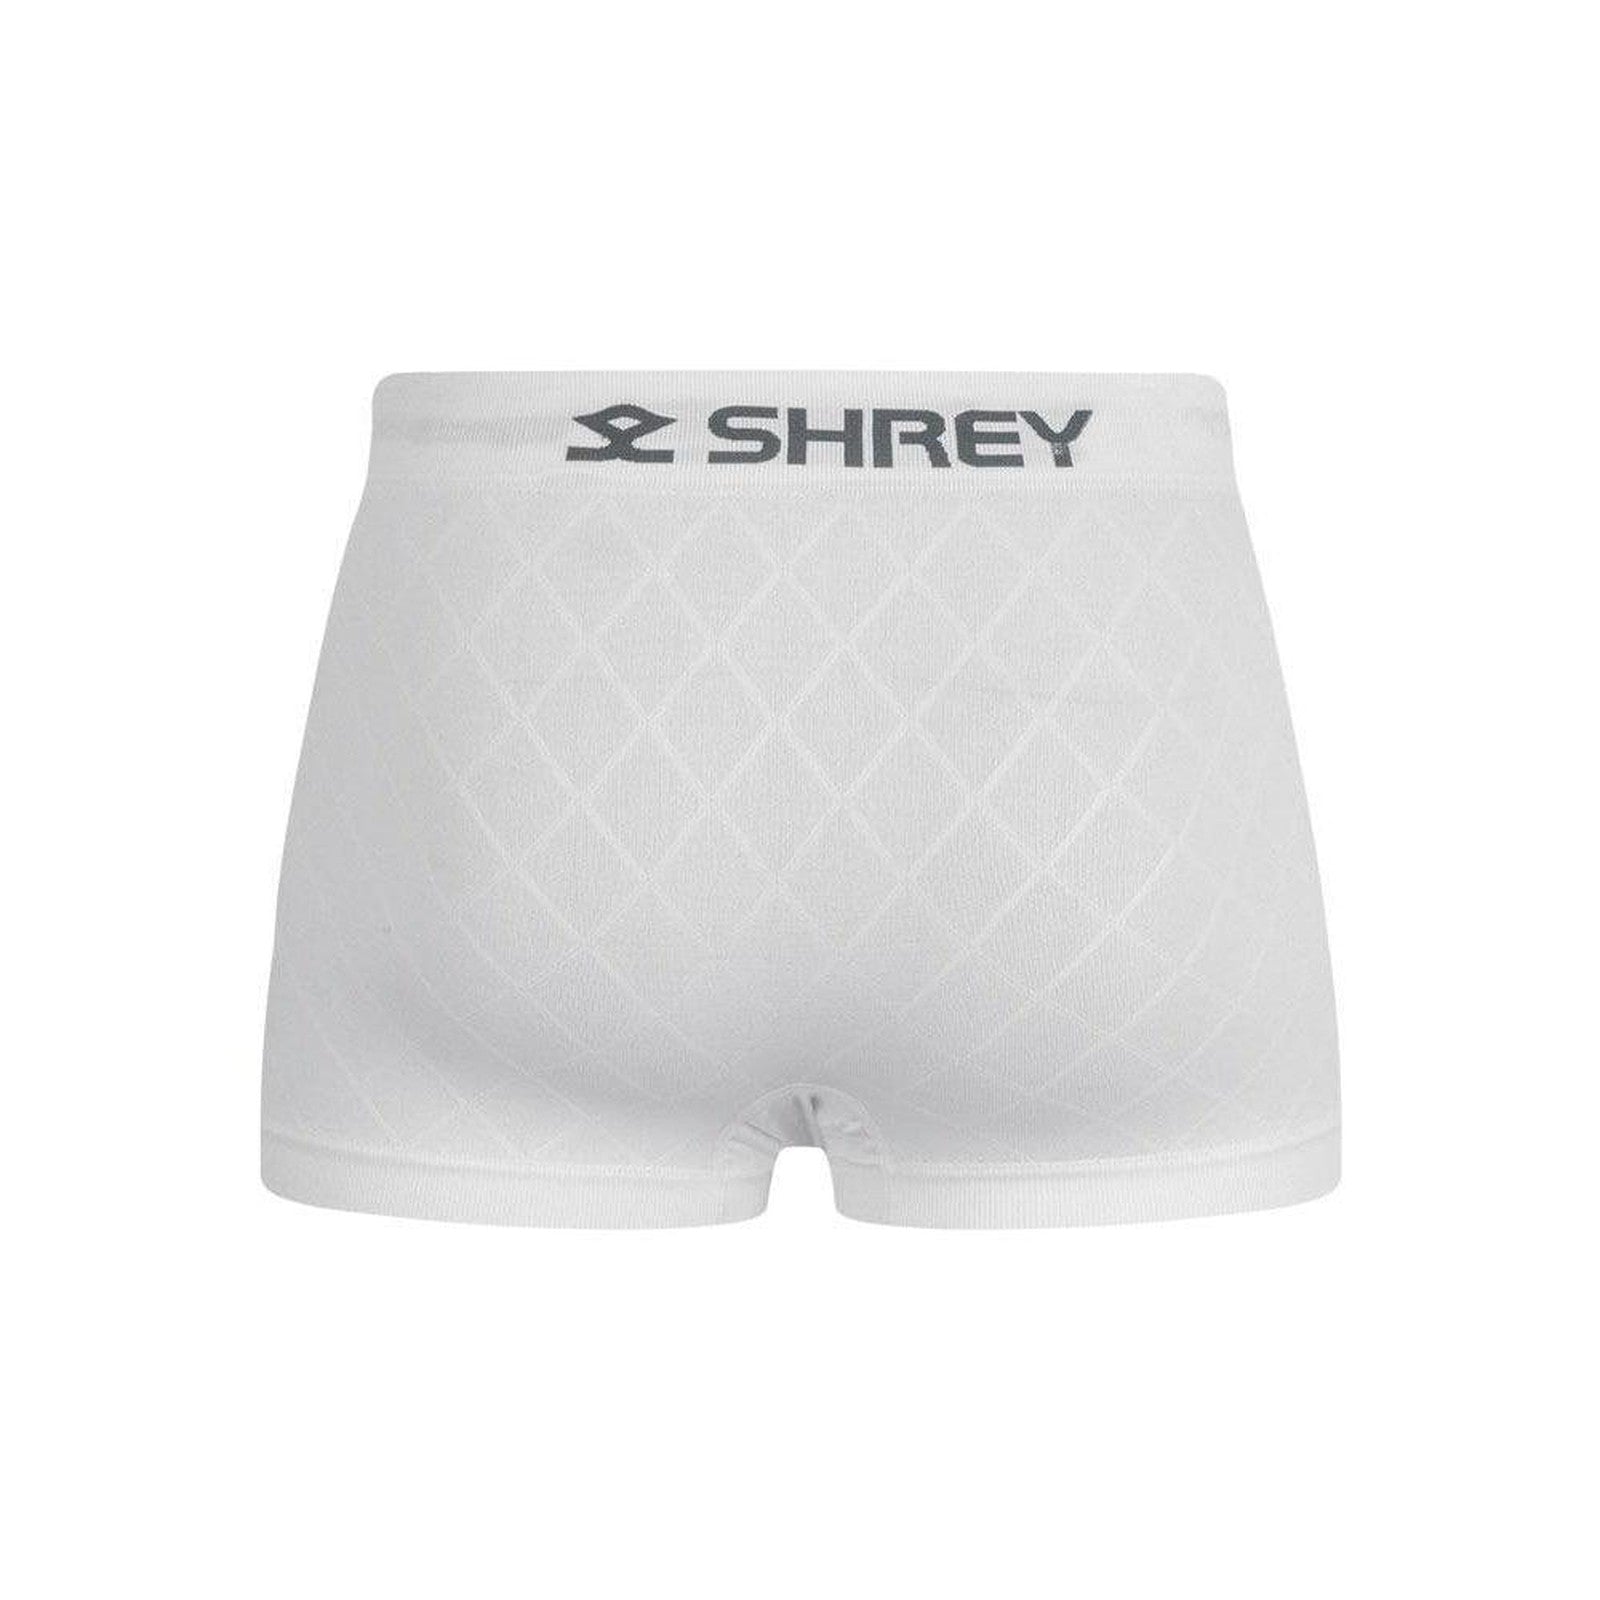 Shrey Performnce Cricket Pro Groin Protector Trunk - Youth